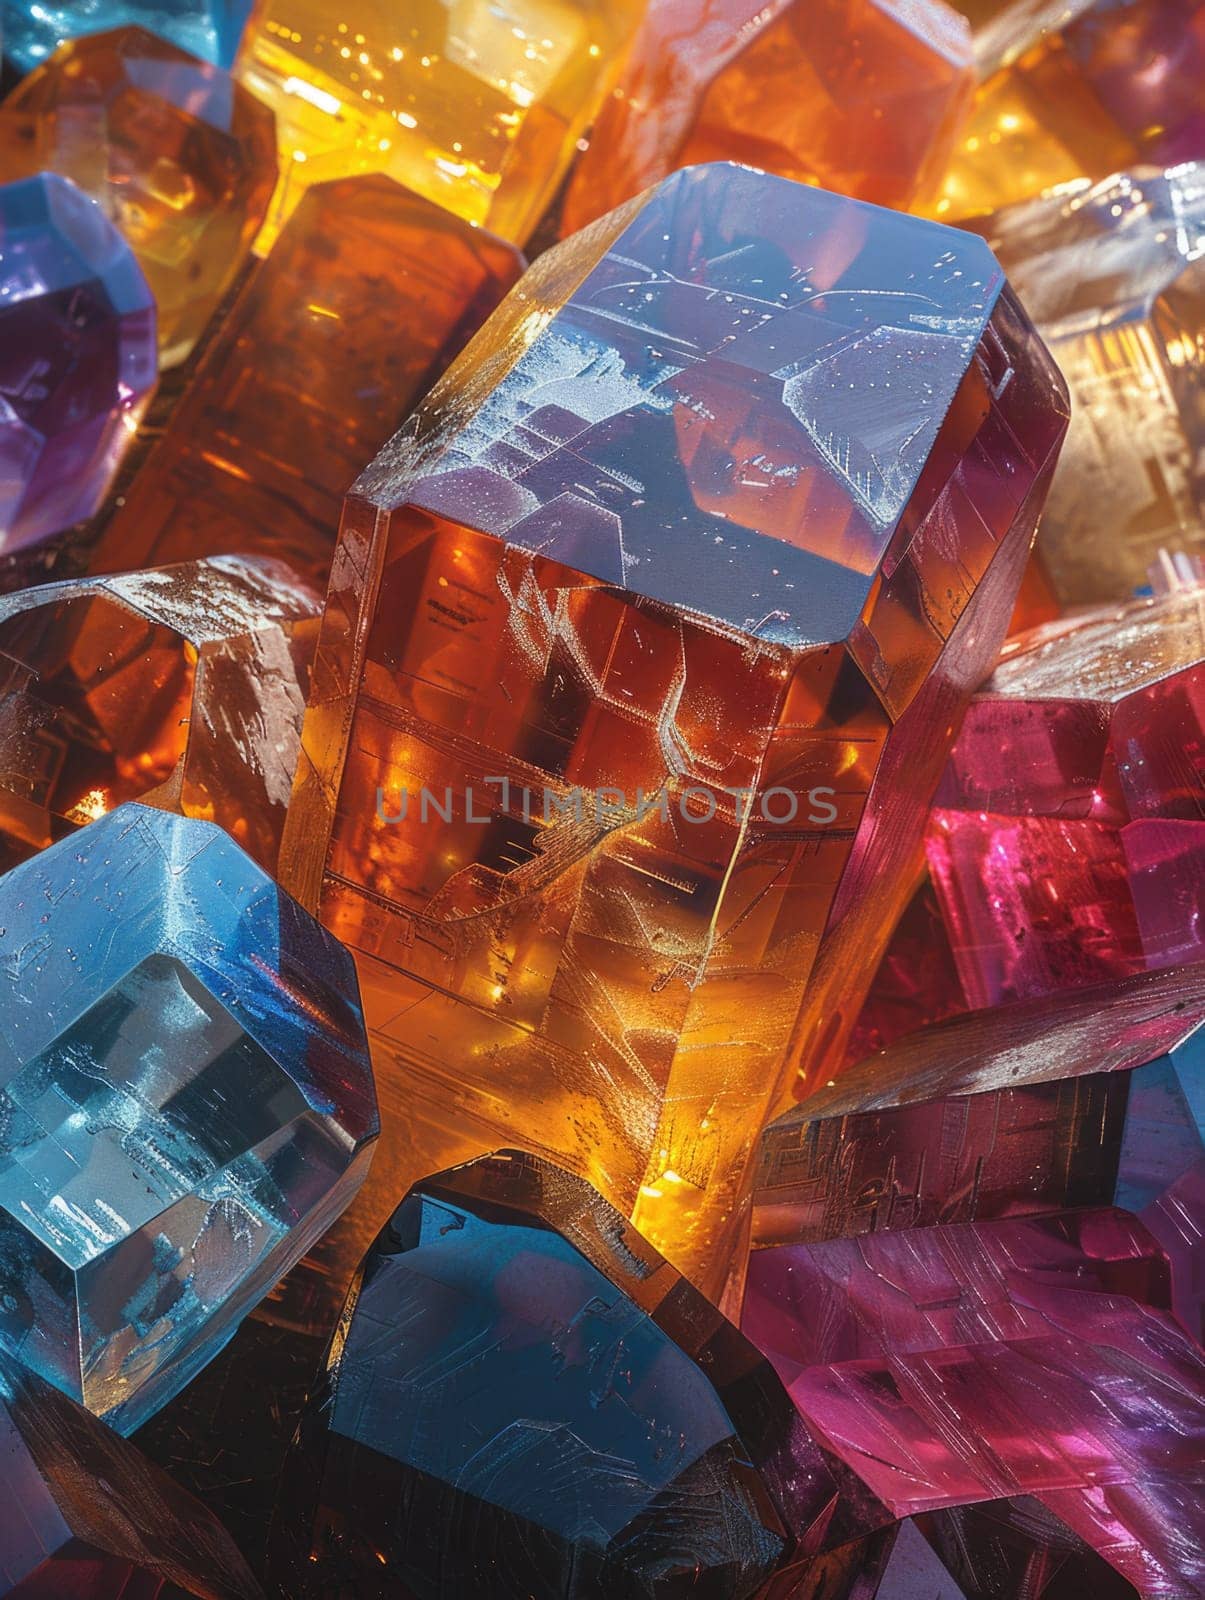 A detailed view of a variety of colorful crystals showcasing different shapes and sizes.